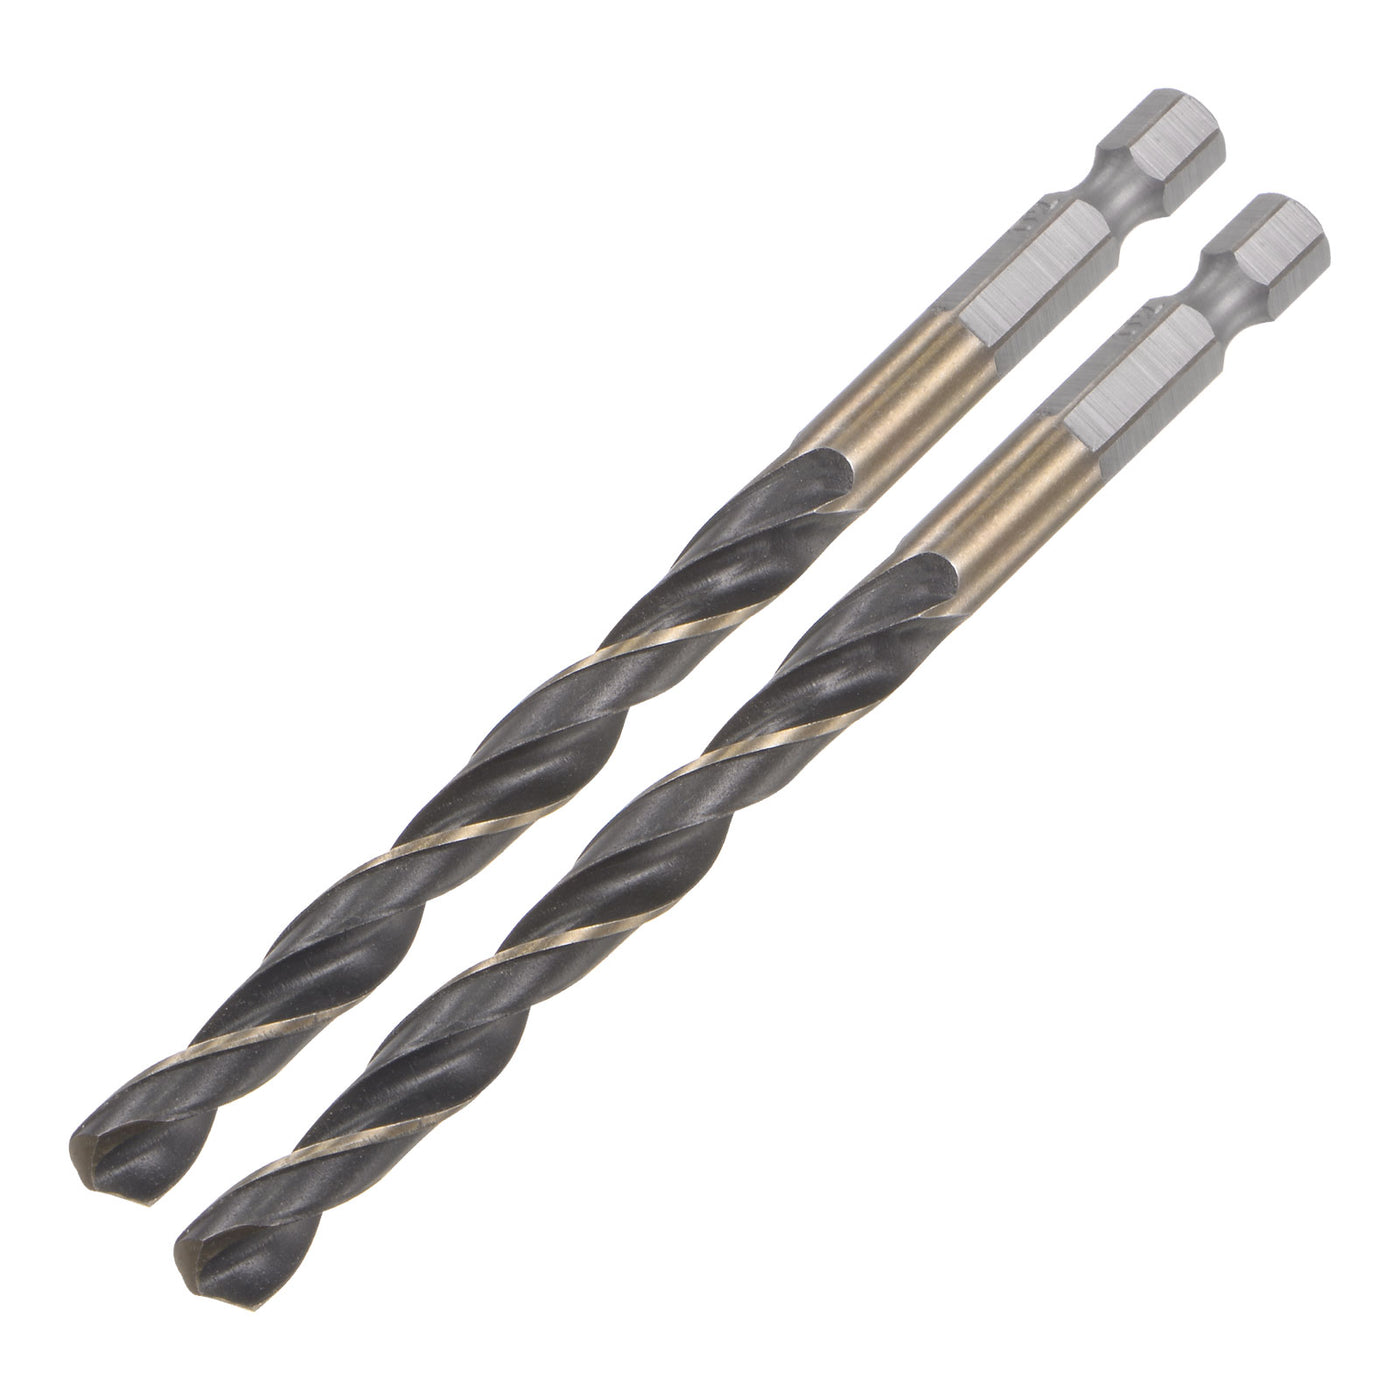 uxcell Uxcell 2Pcs 7mm High Speed Steel Twist Drill Bit with Hex Shank 105mm Length